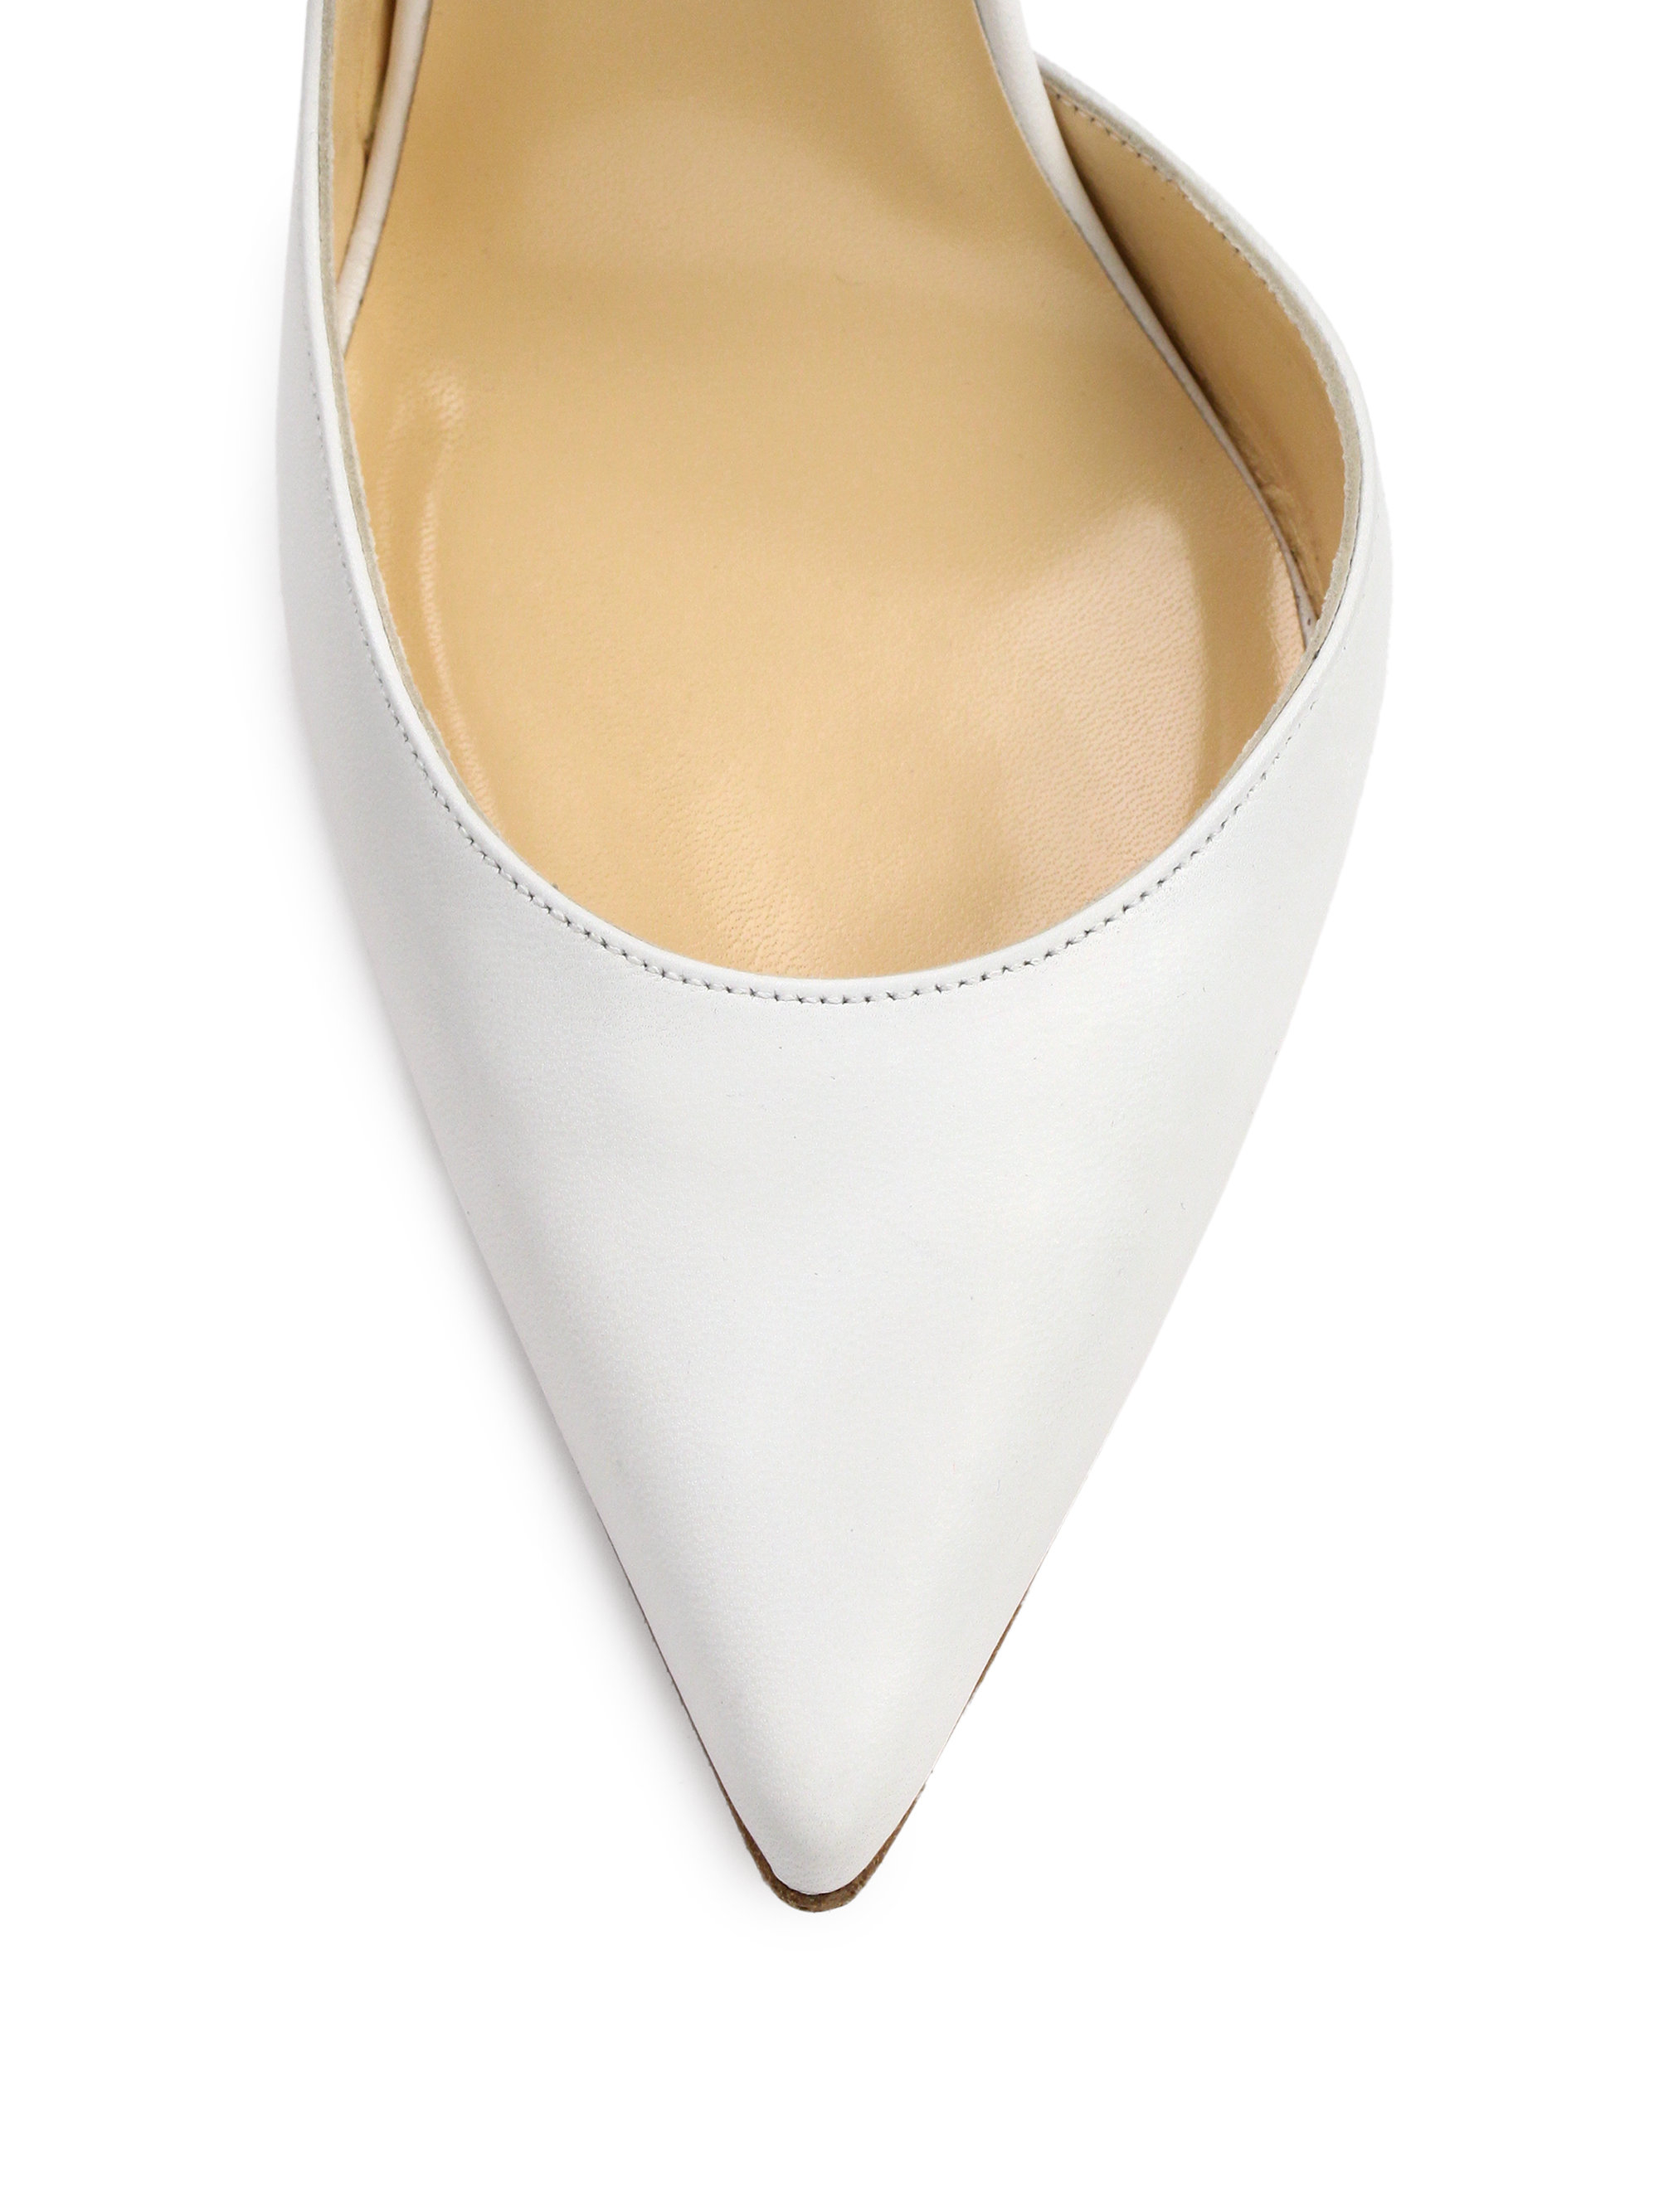 Lyst - Christian Louboutin Iriza Leather D'orsay Pumps in White